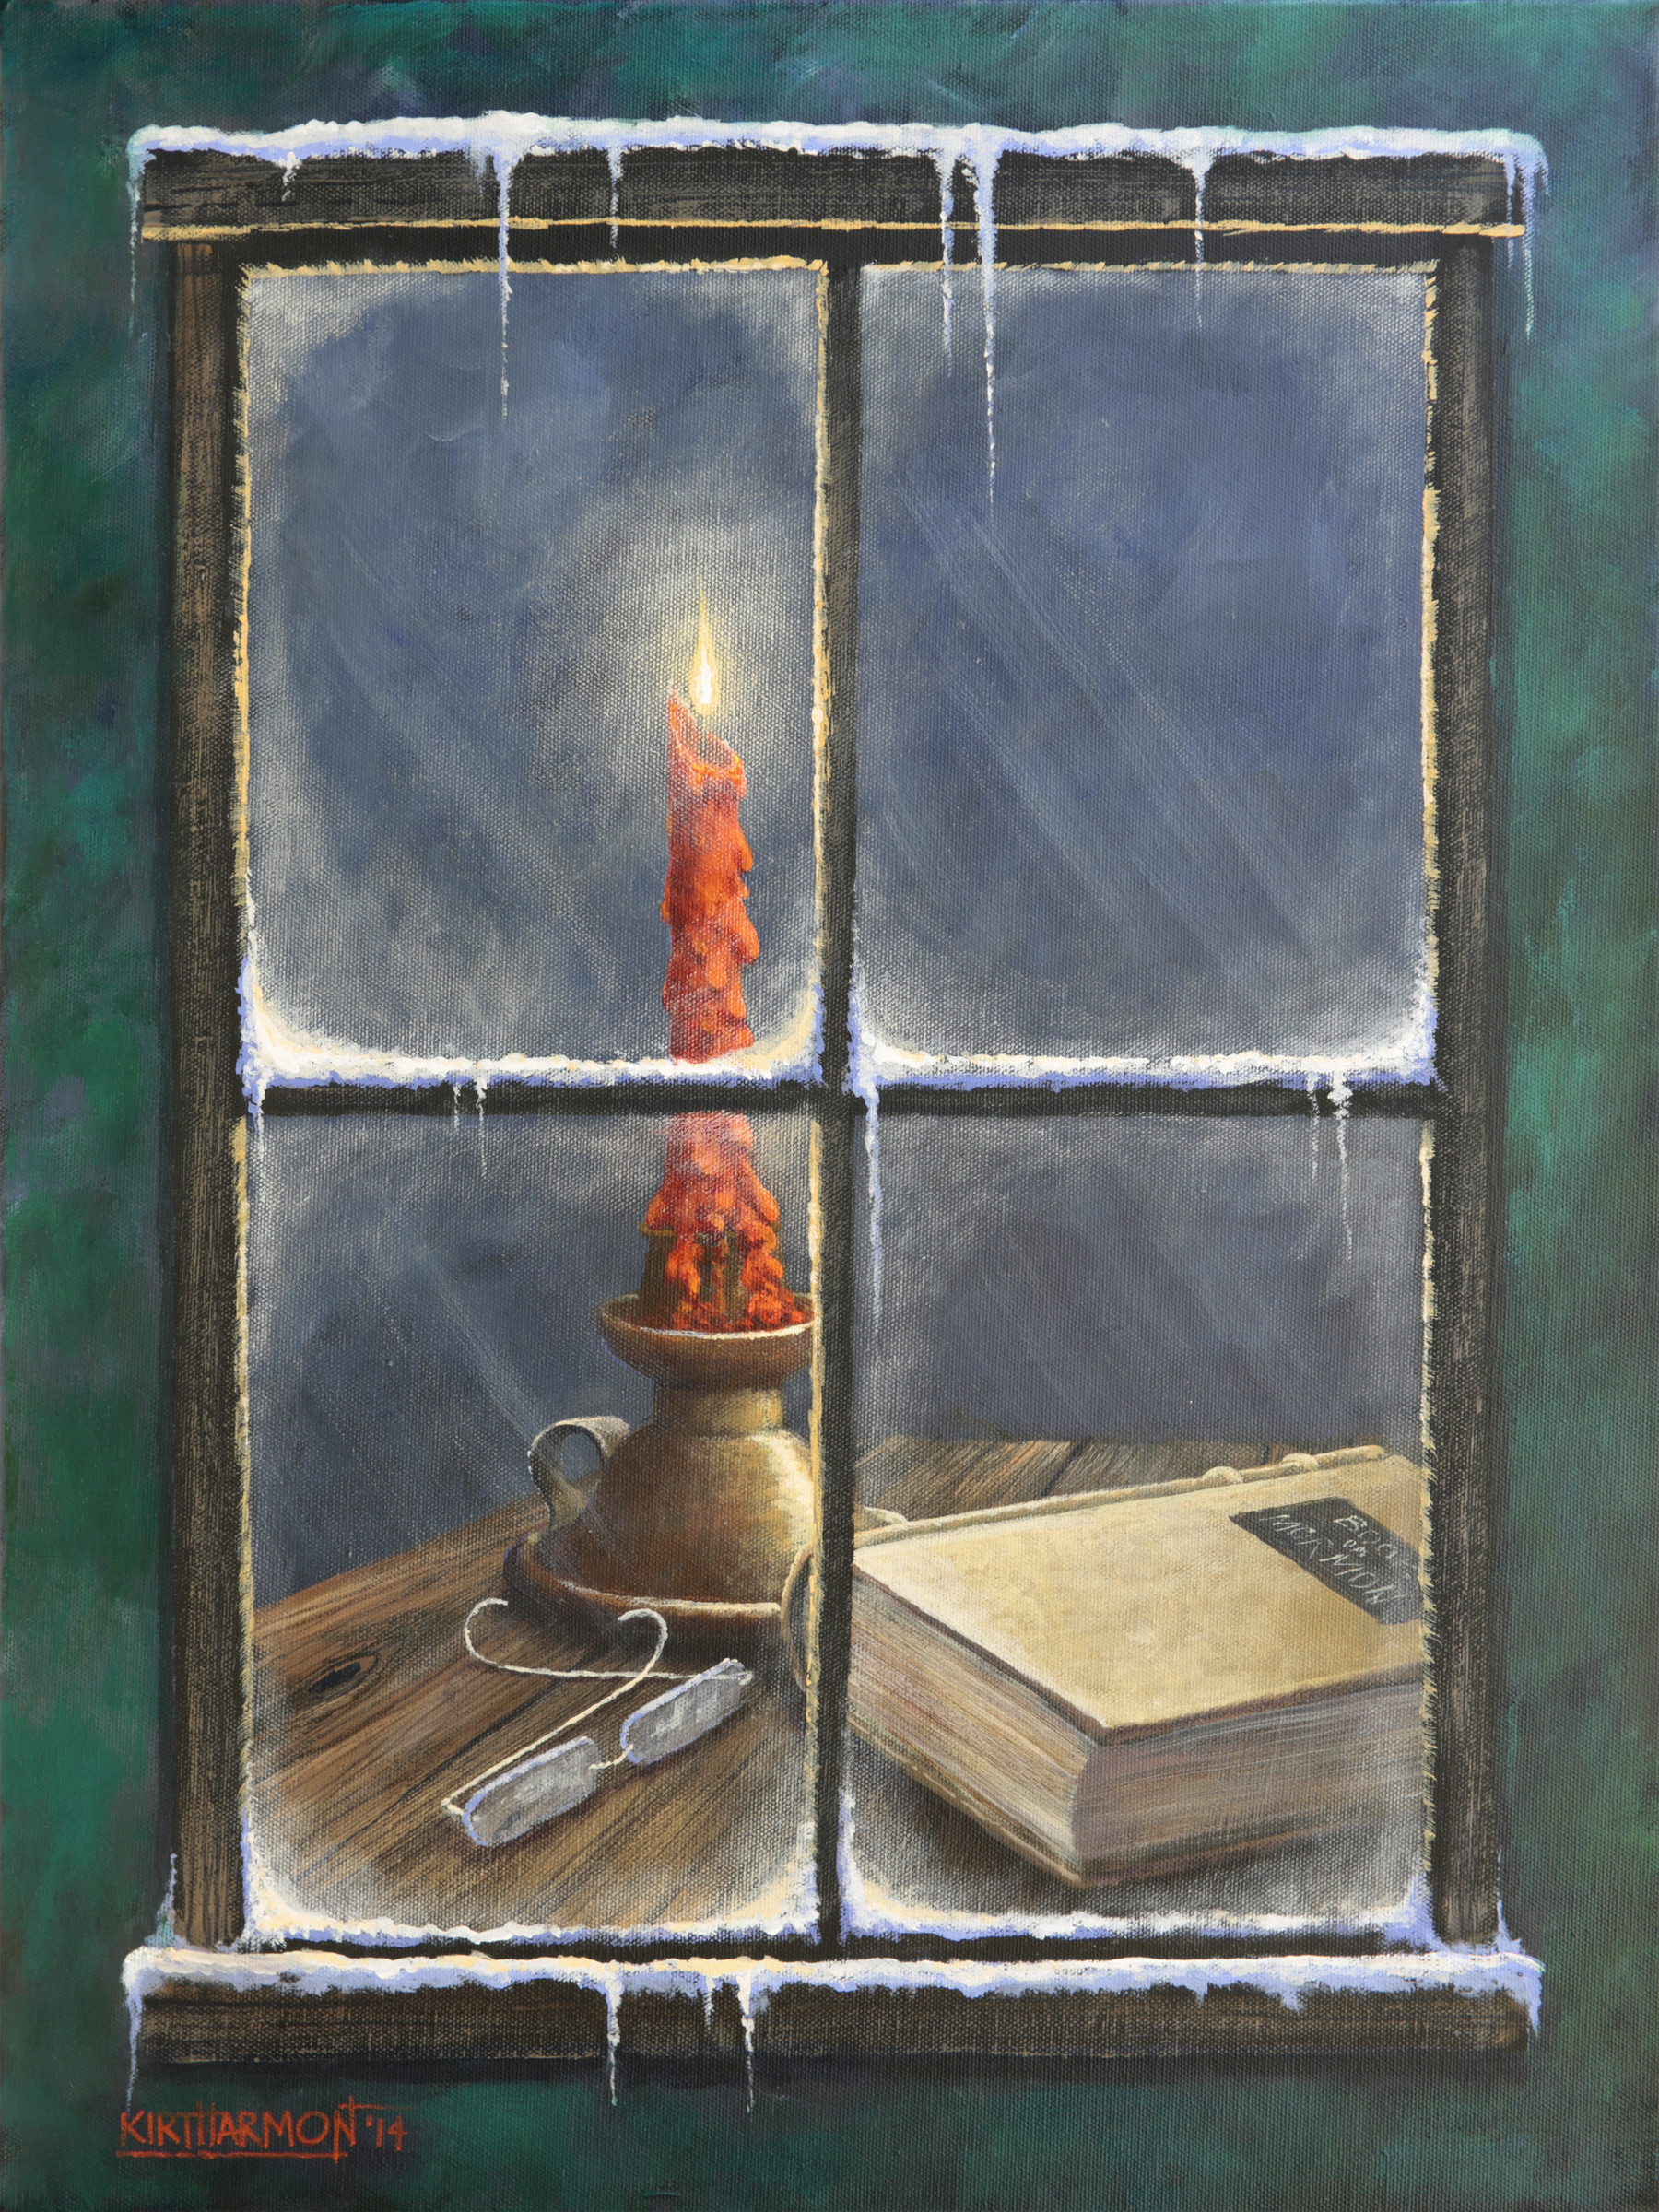 Christmas stories by candlelight